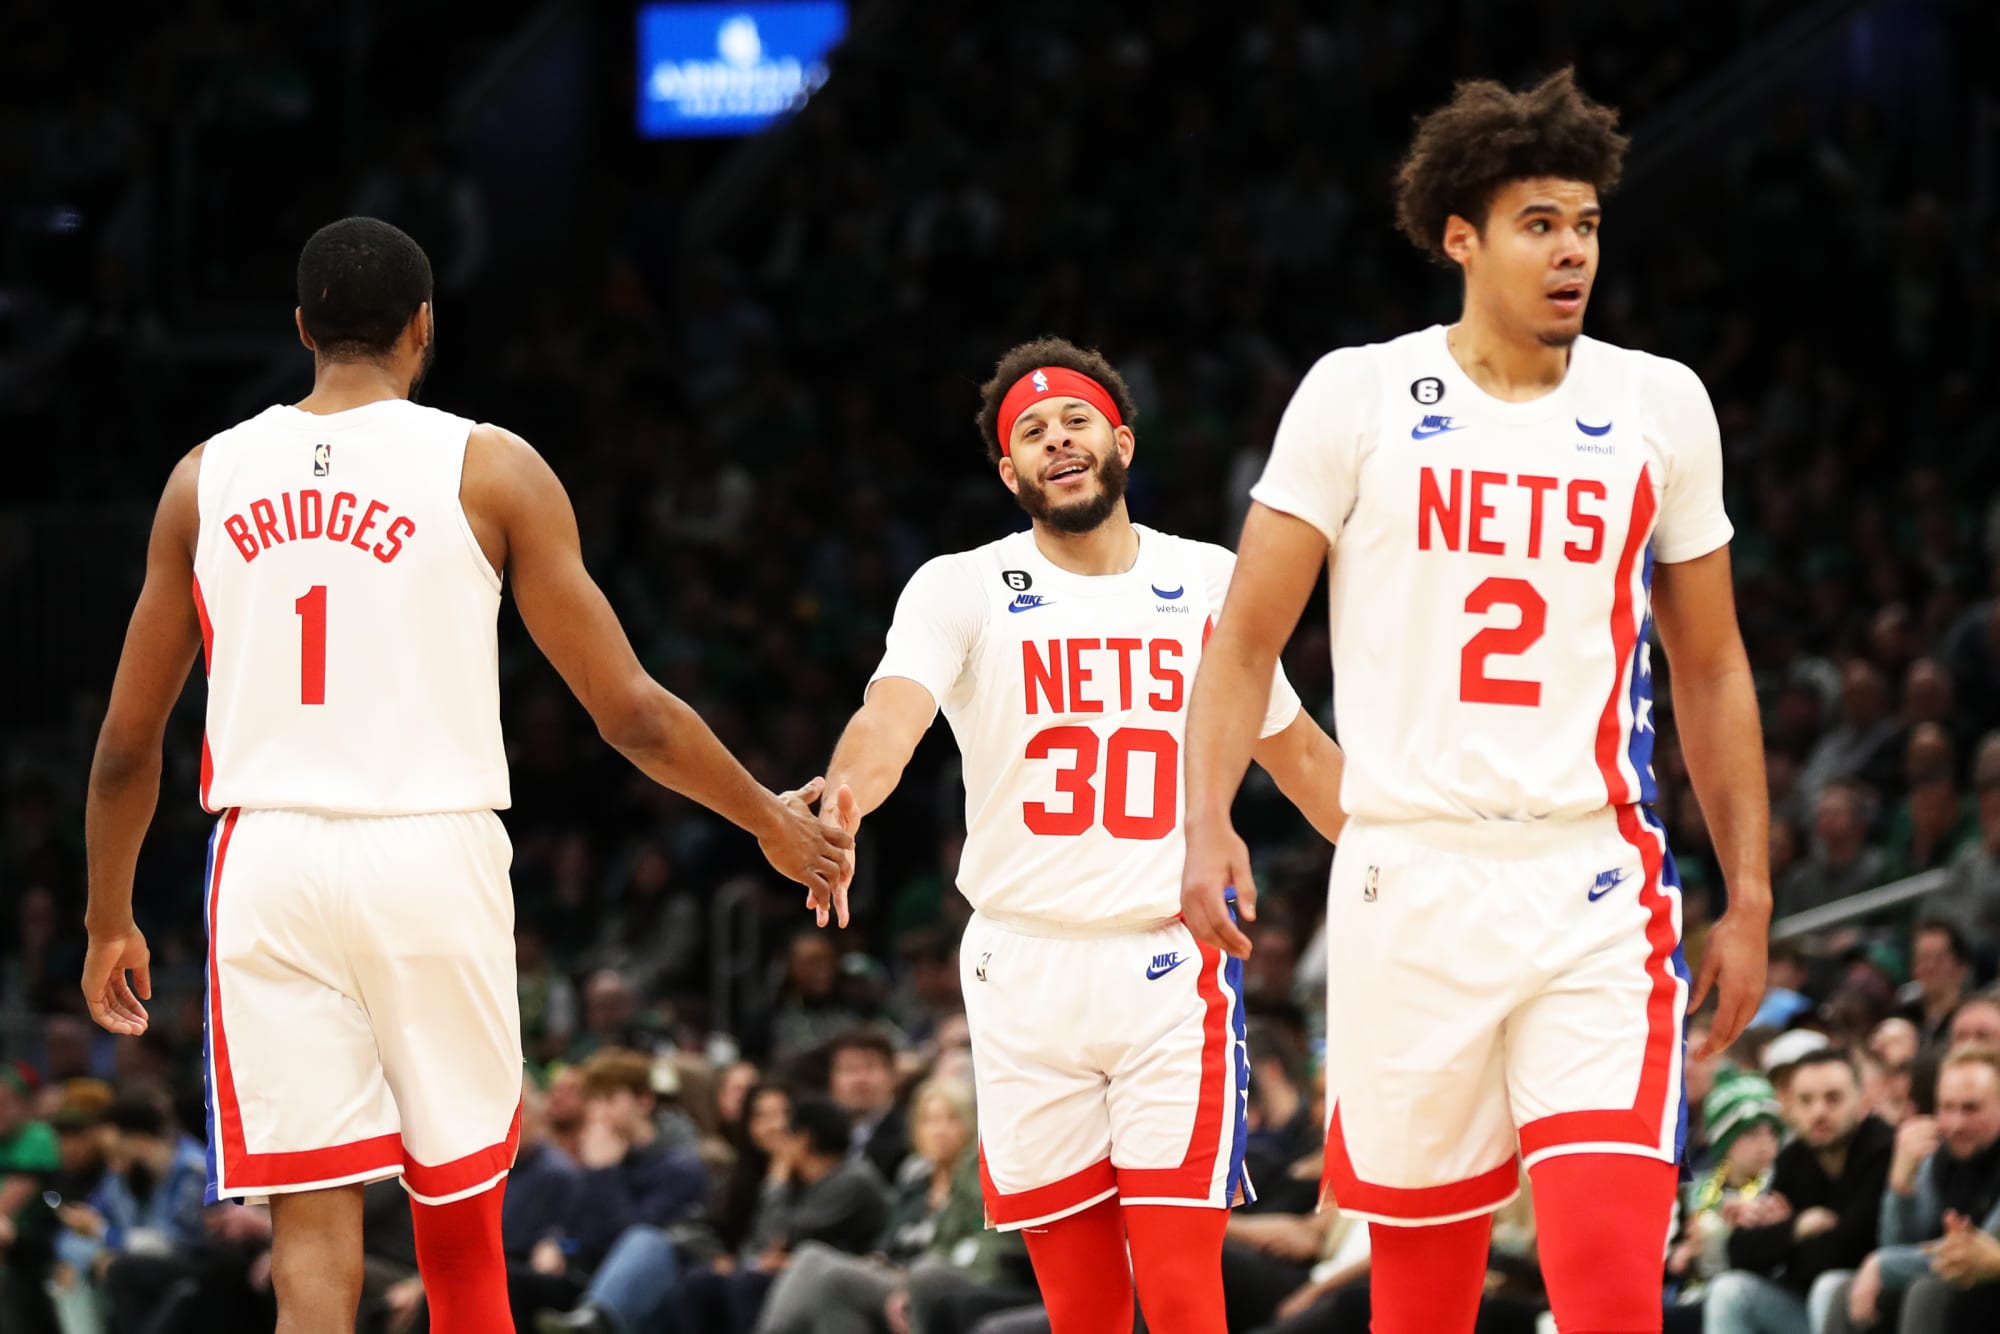 Philadelphia 76ers playoff scouting 2023: 3 Nets free agents to